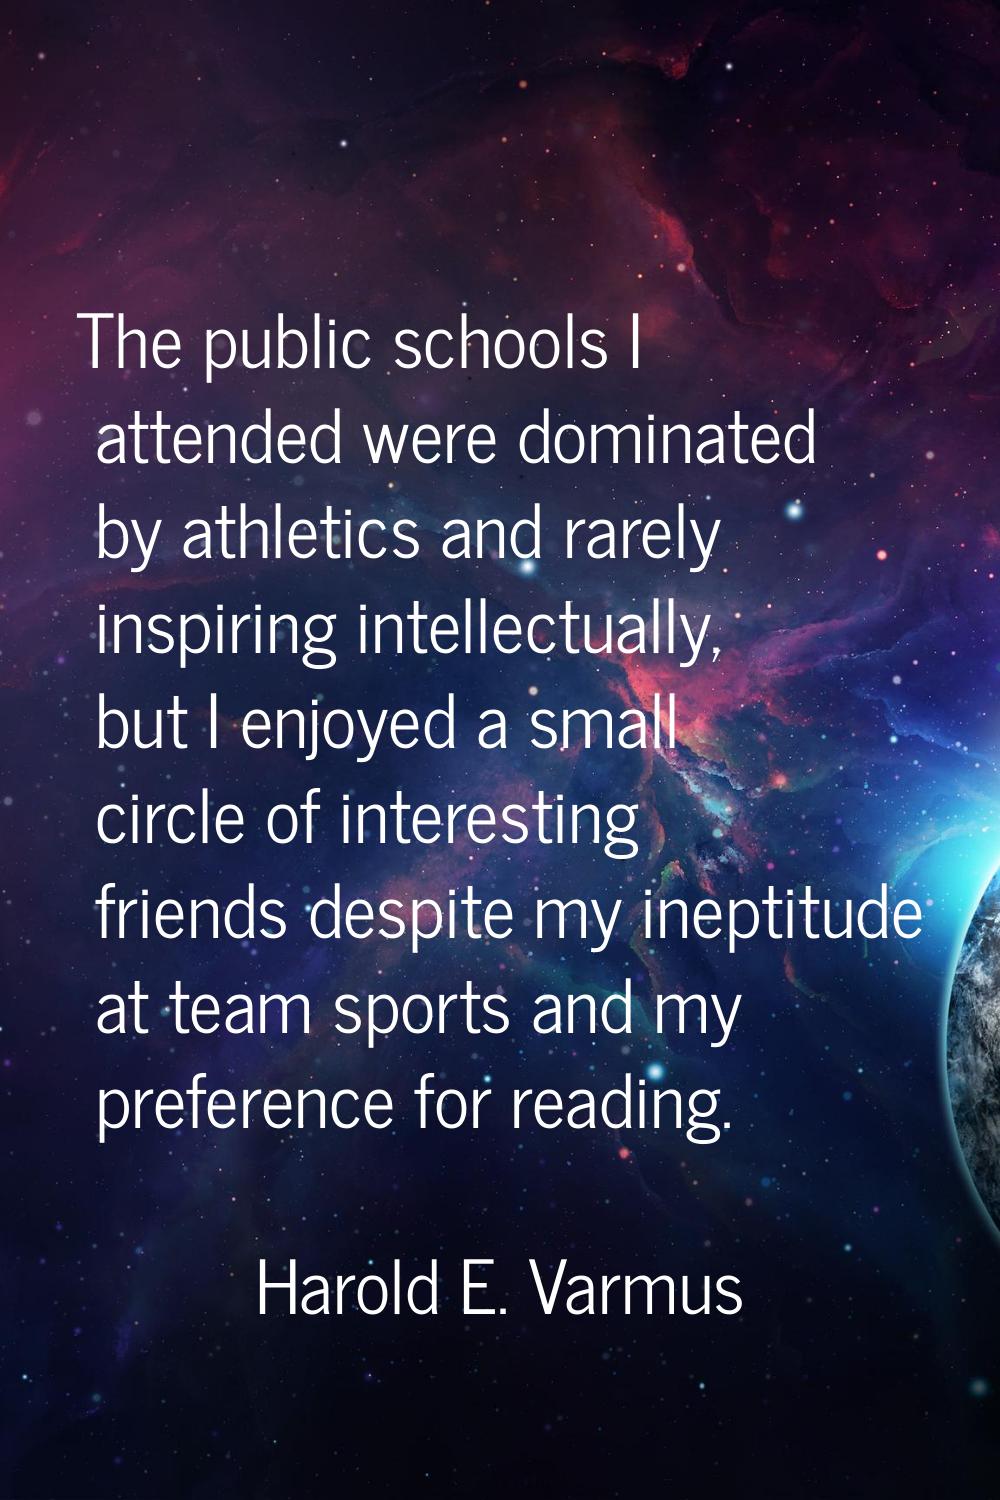 The public schools I attended were dominated by athletics and rarely inspiring intellectually, but 